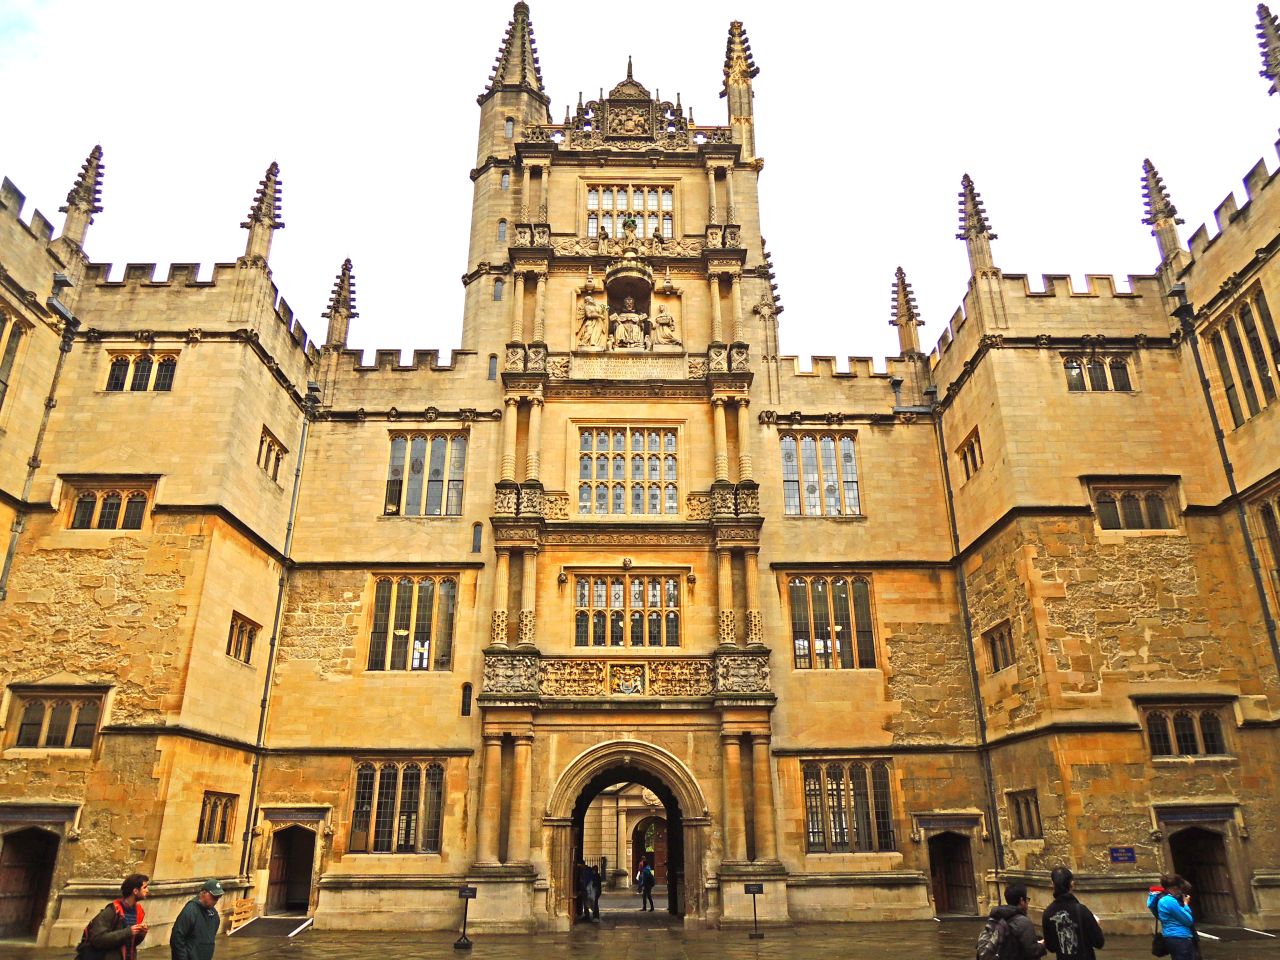 The <a href="http://www.bodleian.ox.ac.uk/bodley" target="_blank" target="_blank">Bodleian Library</a> is <a href="http://ireport.cnn.com/docs/DOC-1117622">Oxford University's main research library</a>, and one of the six Legal Deposit libraries. Legal Deposit, part of English law since 1662, ensures that everything published in the nation is collected and retained in libraries as part of the national public archive. 